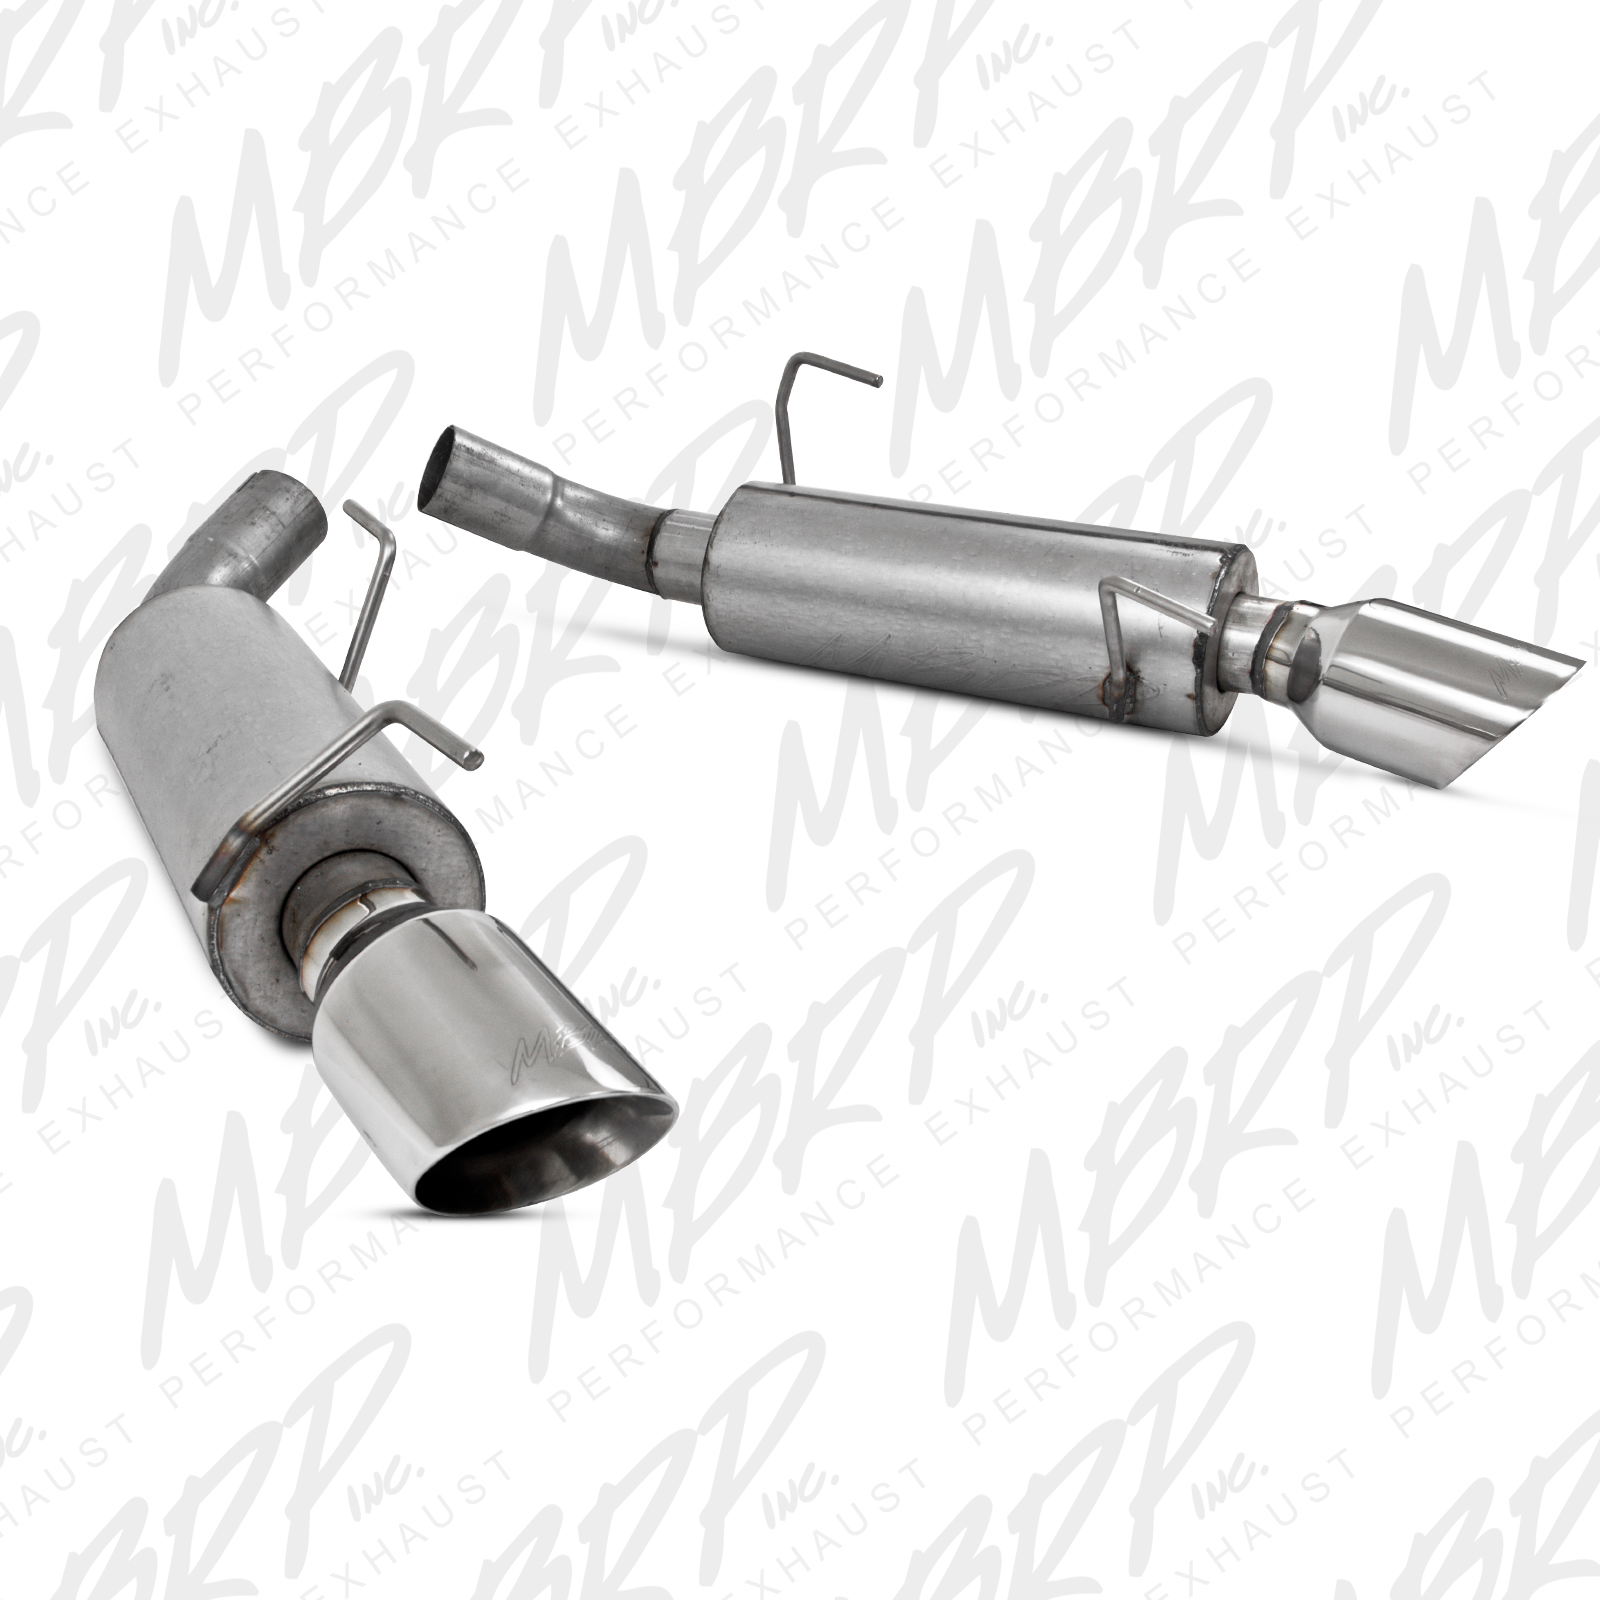 2005-2010 Ford Mustang GT MBRP Performance Axle Back Dual Split Rear Exhaust System - Aluminized Steel